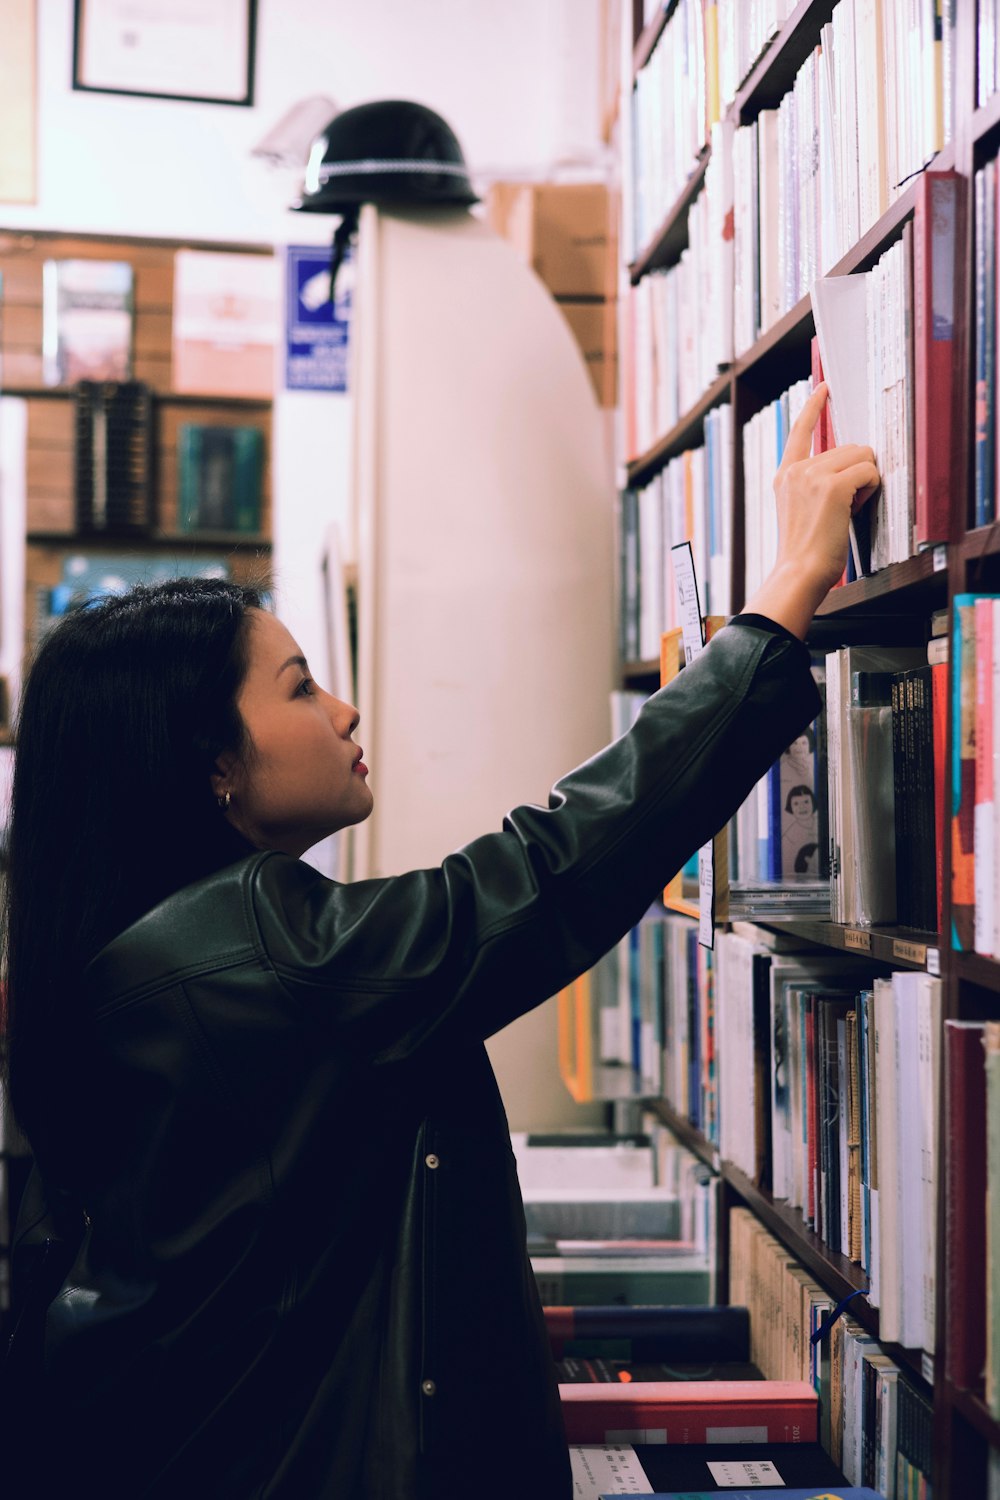 a woman is looking at books on a shelf